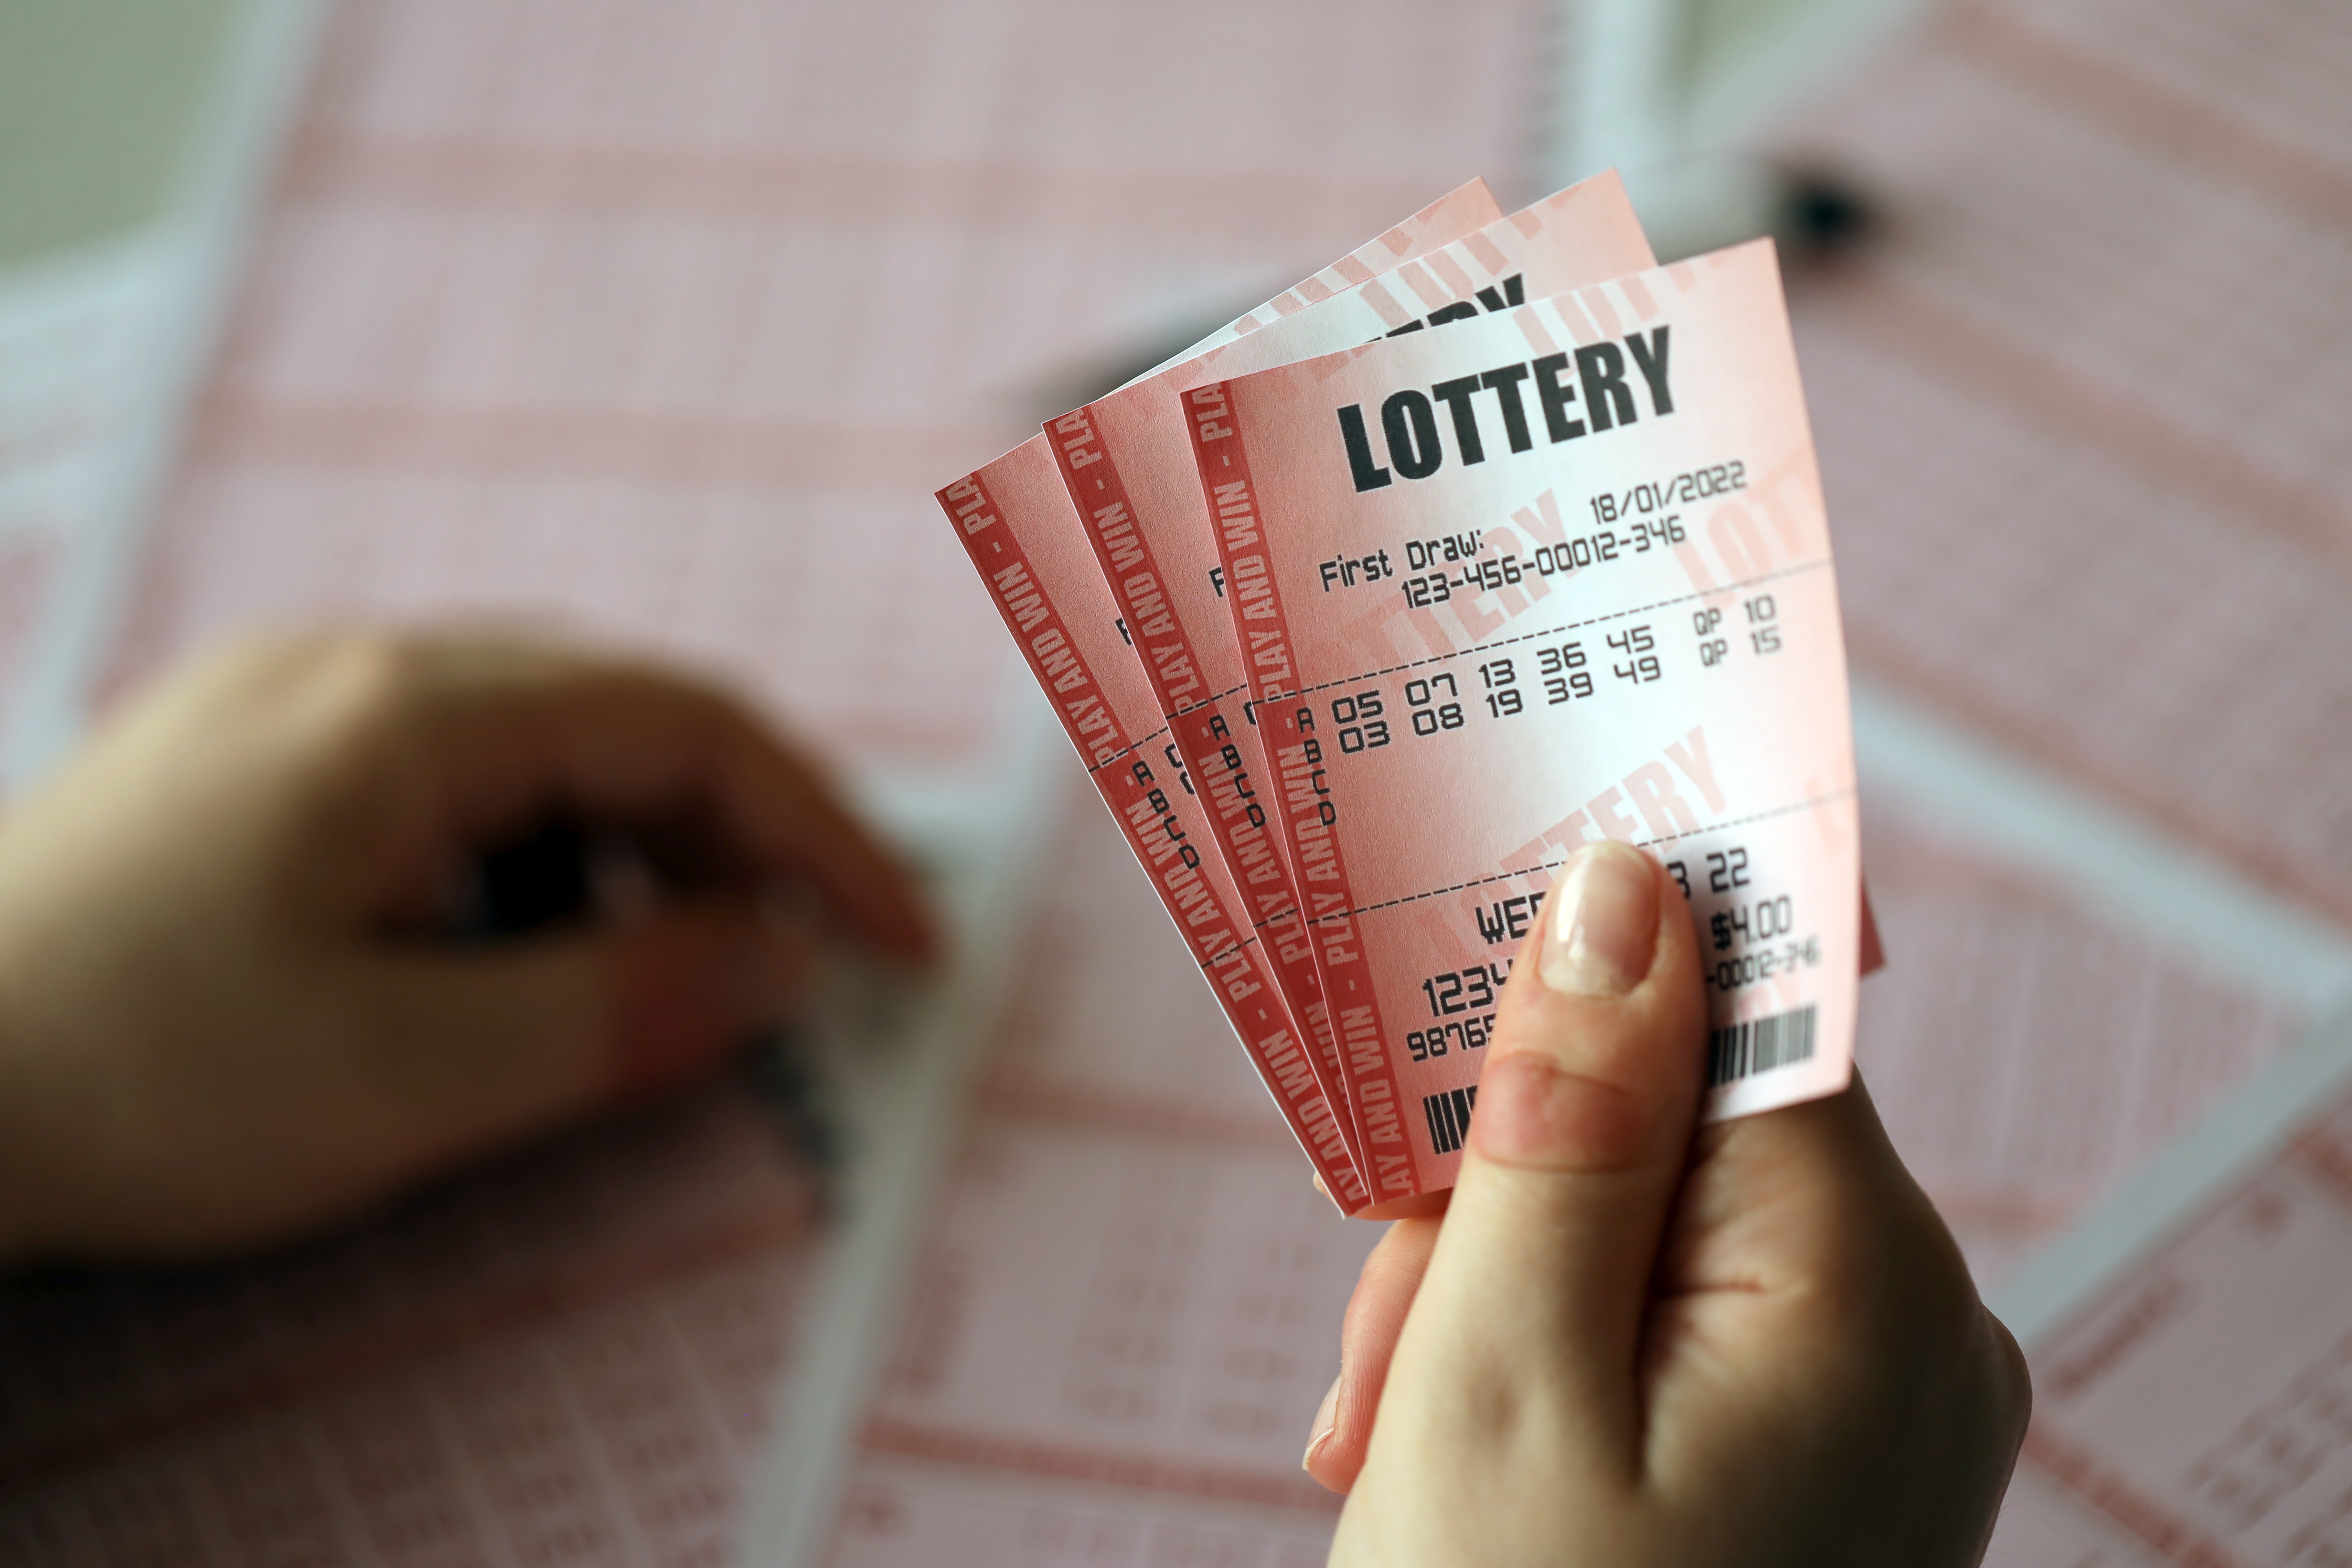 A person holding lottery tickets | Source: Shutterstock